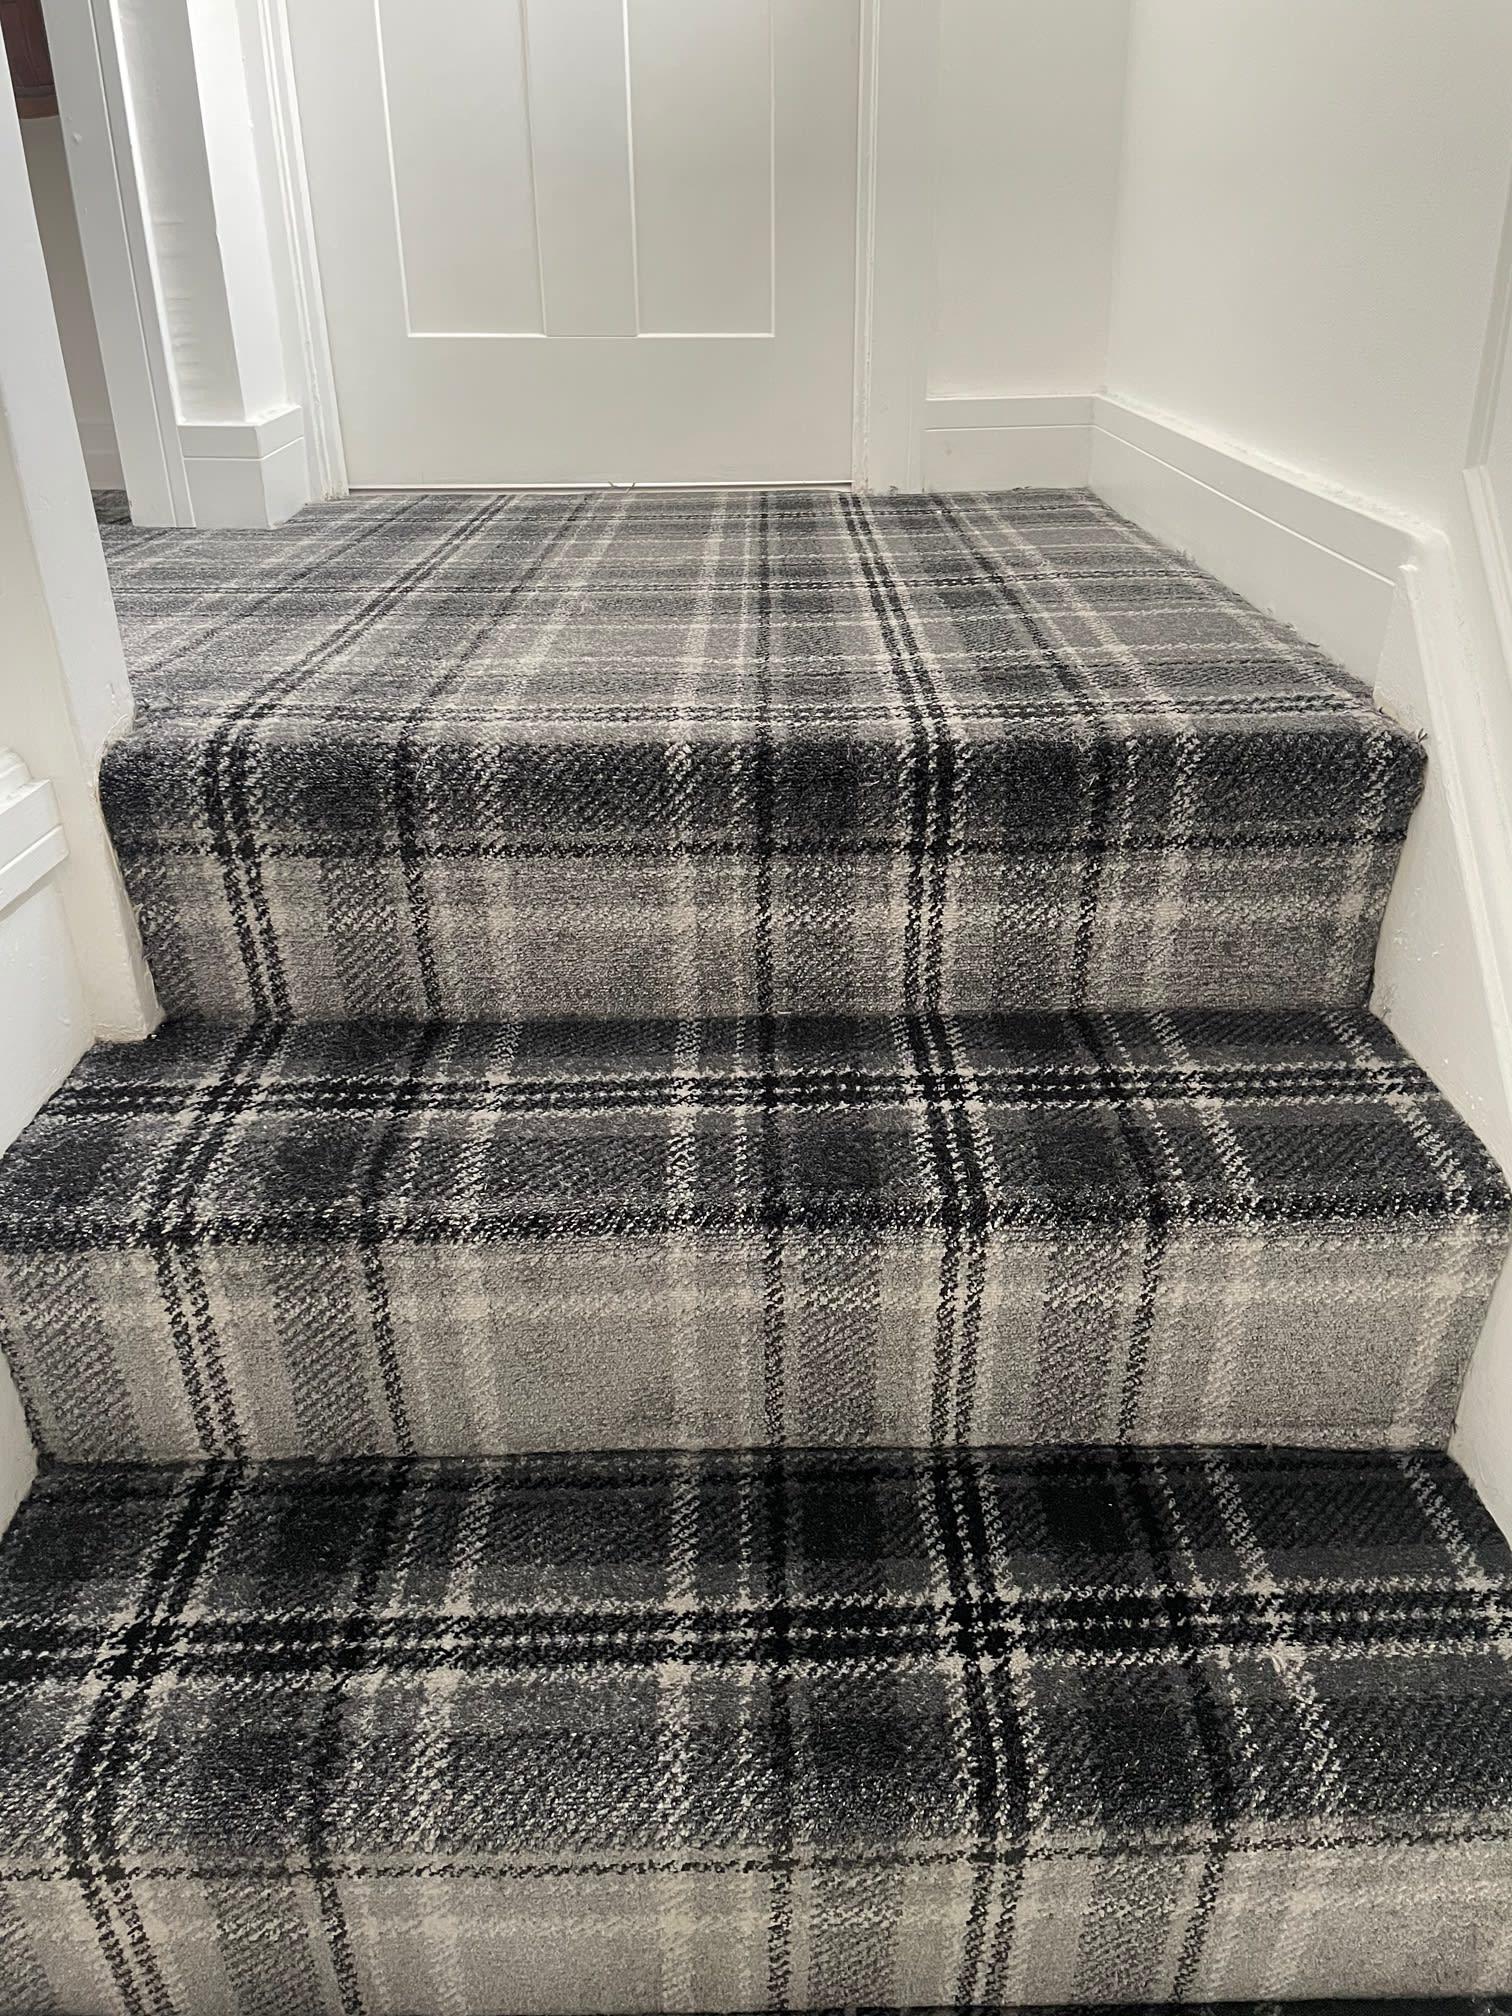 Images Ferriers carpet fitting service